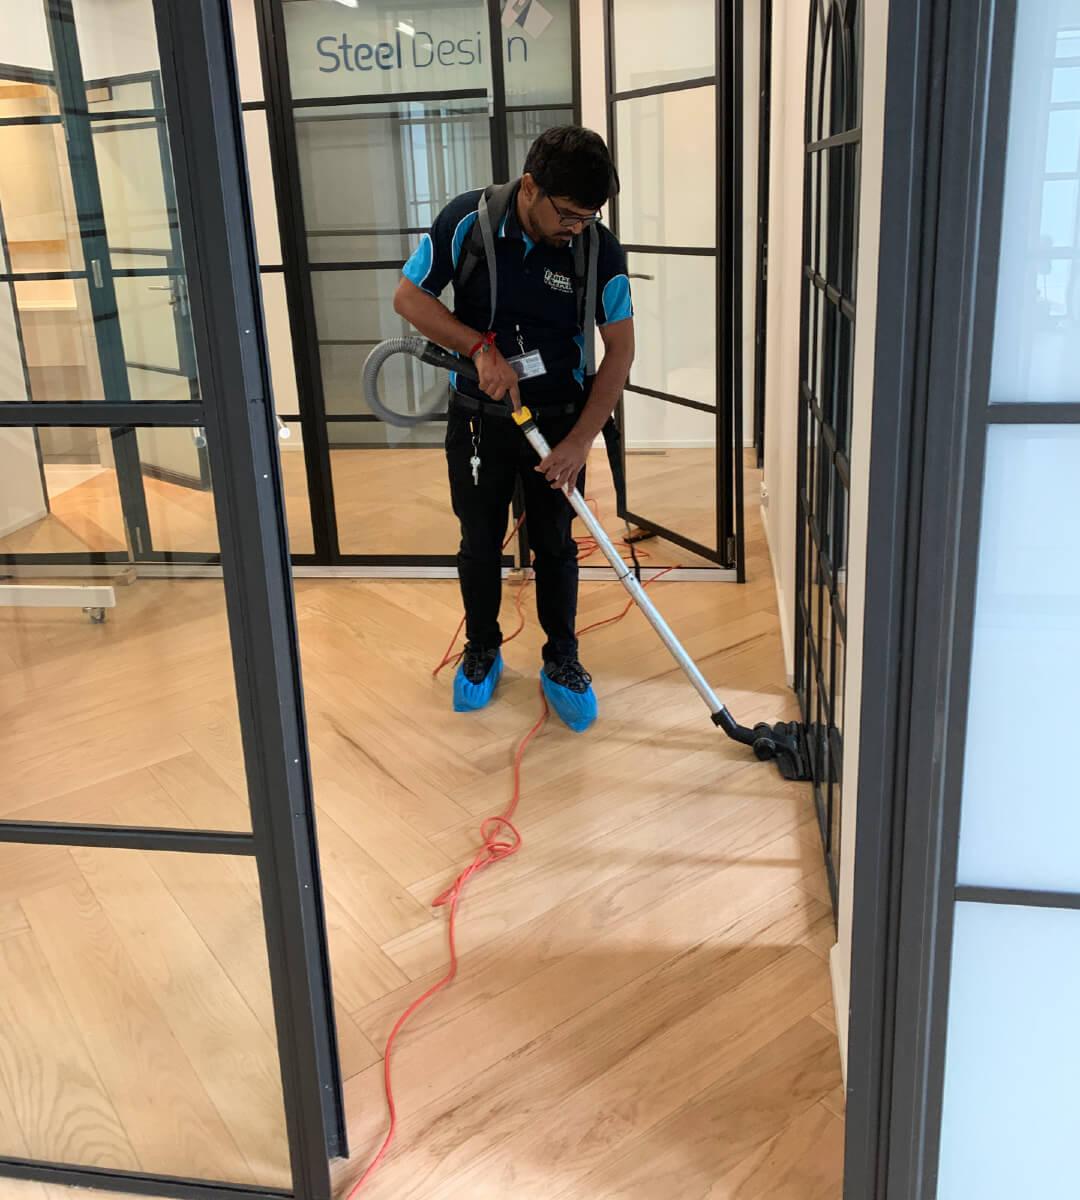 Commercial Cleaning services - Professional cleaner vaccuuming the wooden floor of an office